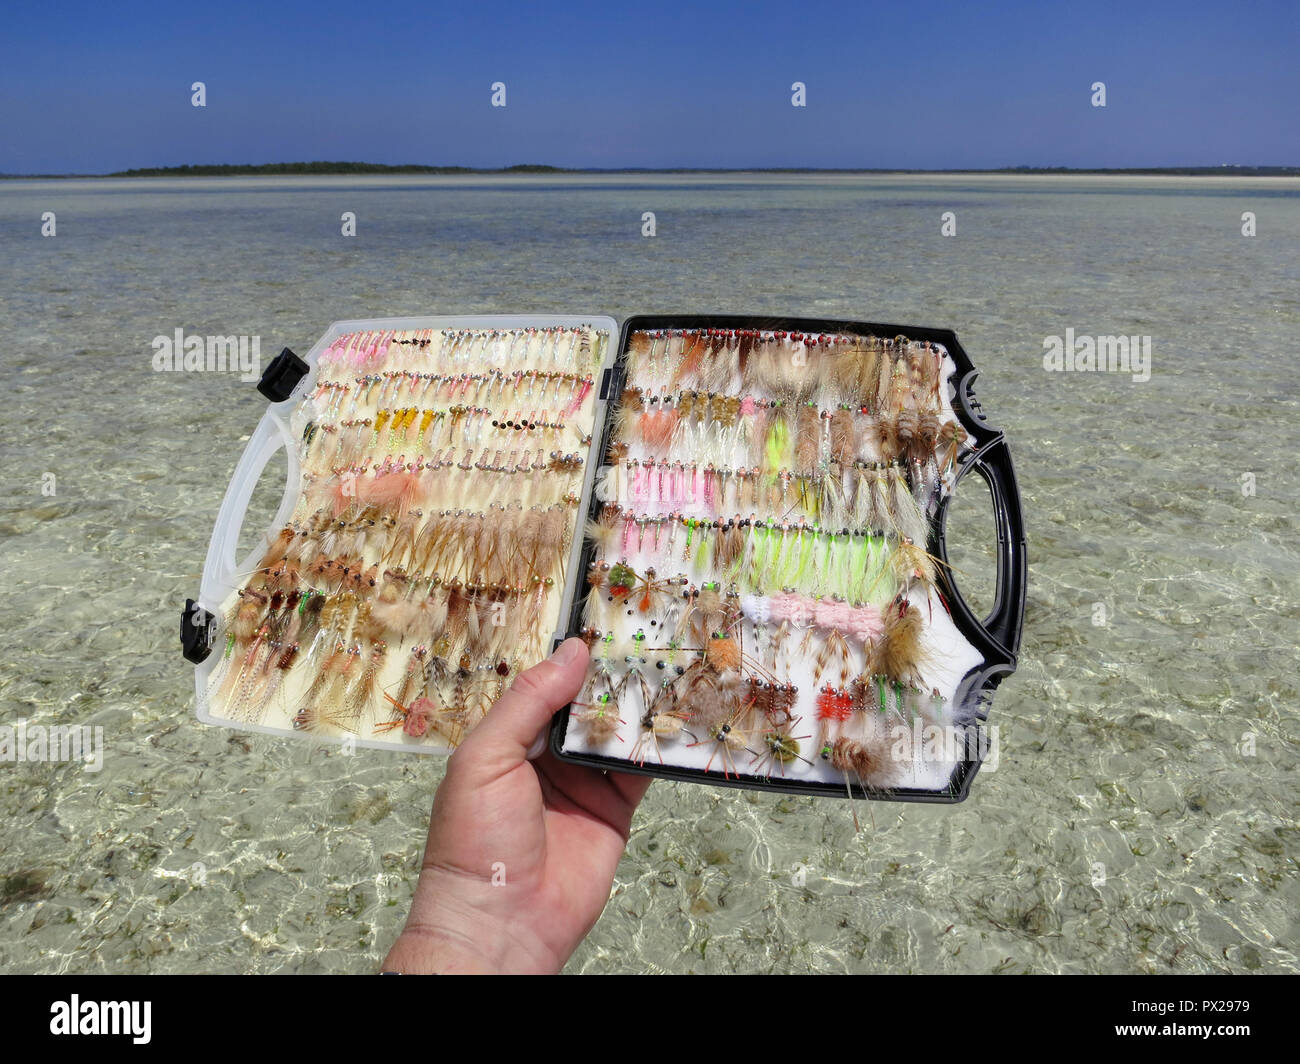 Fly box filled with flies for fly fishing in shallow water for bonefish and permit. Stock Photo